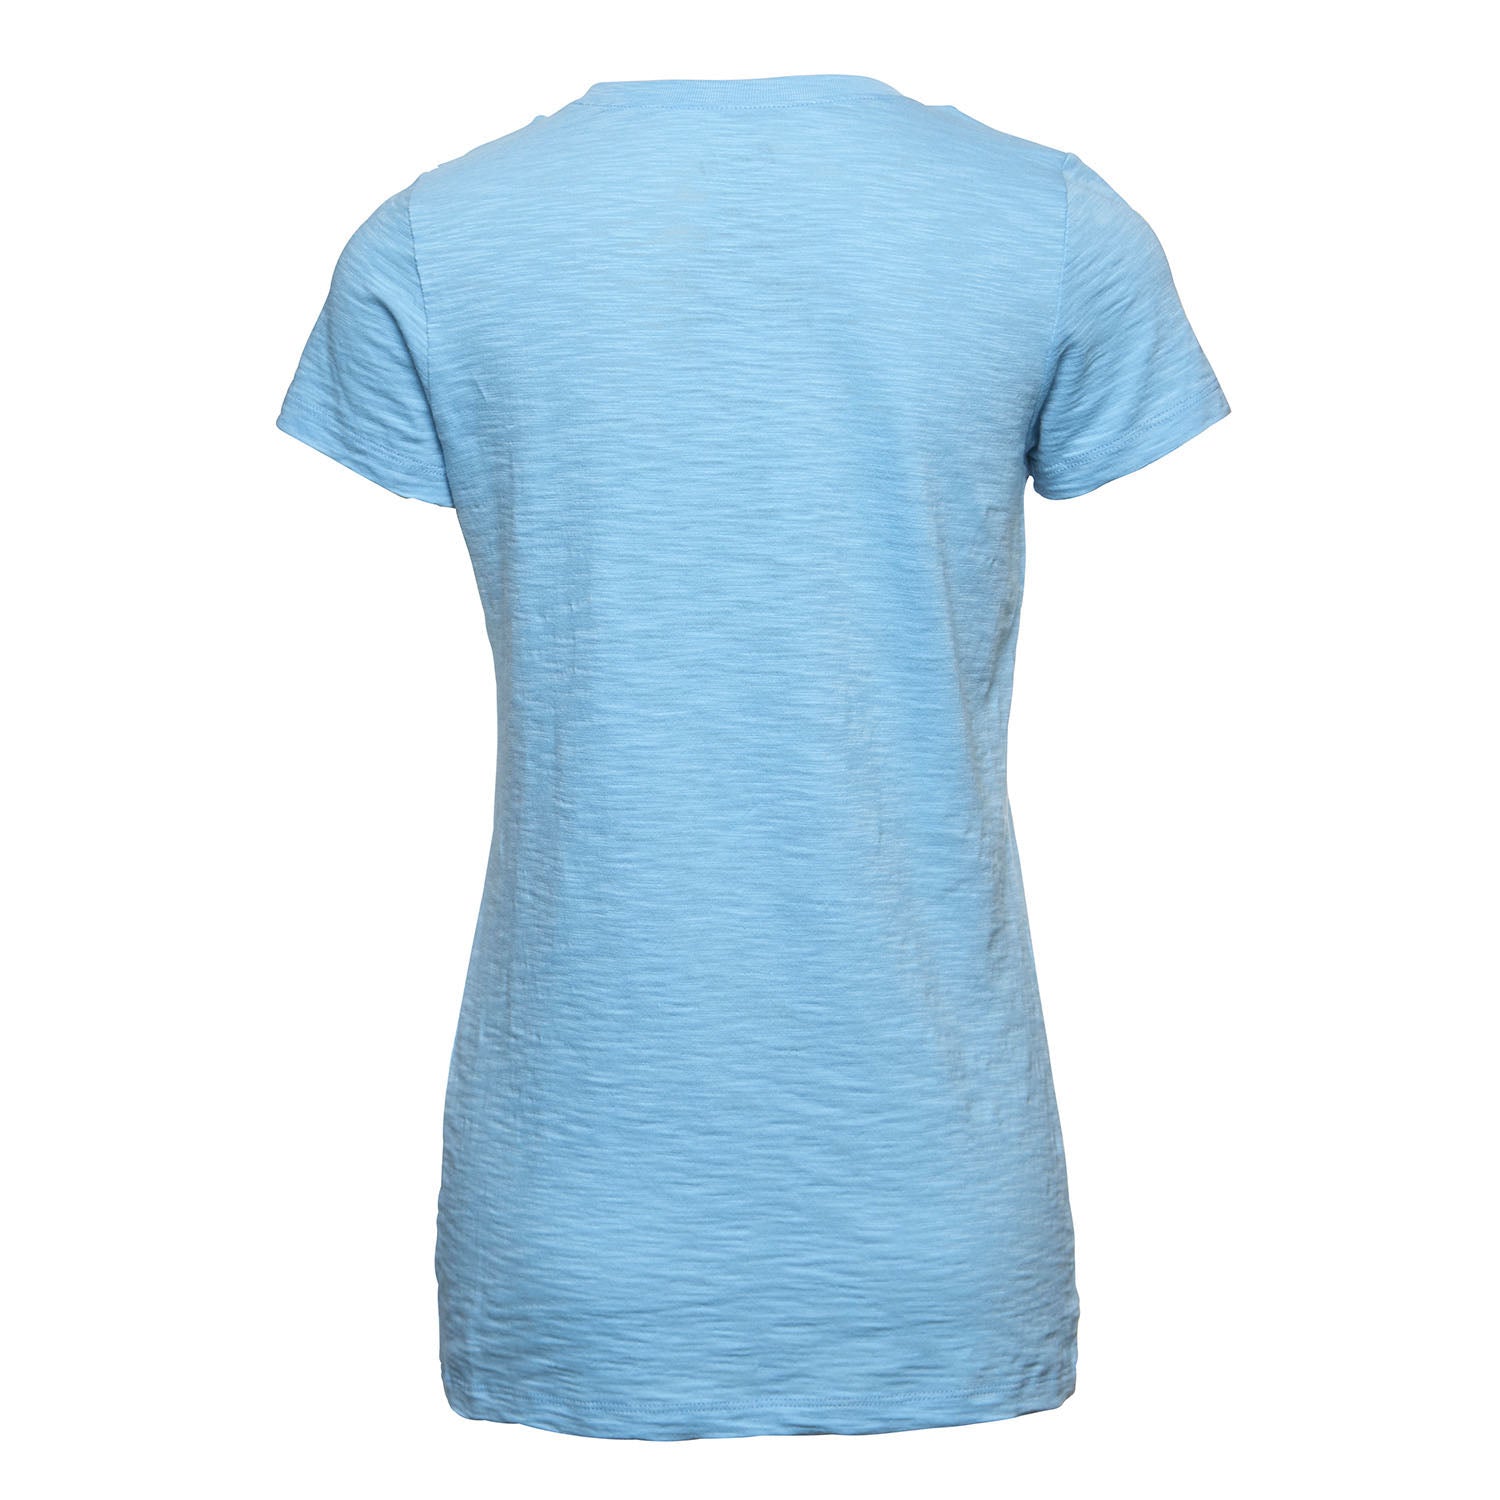 47 Brand Women's Scrum V-Neck T-Shirt in Blue- Front View